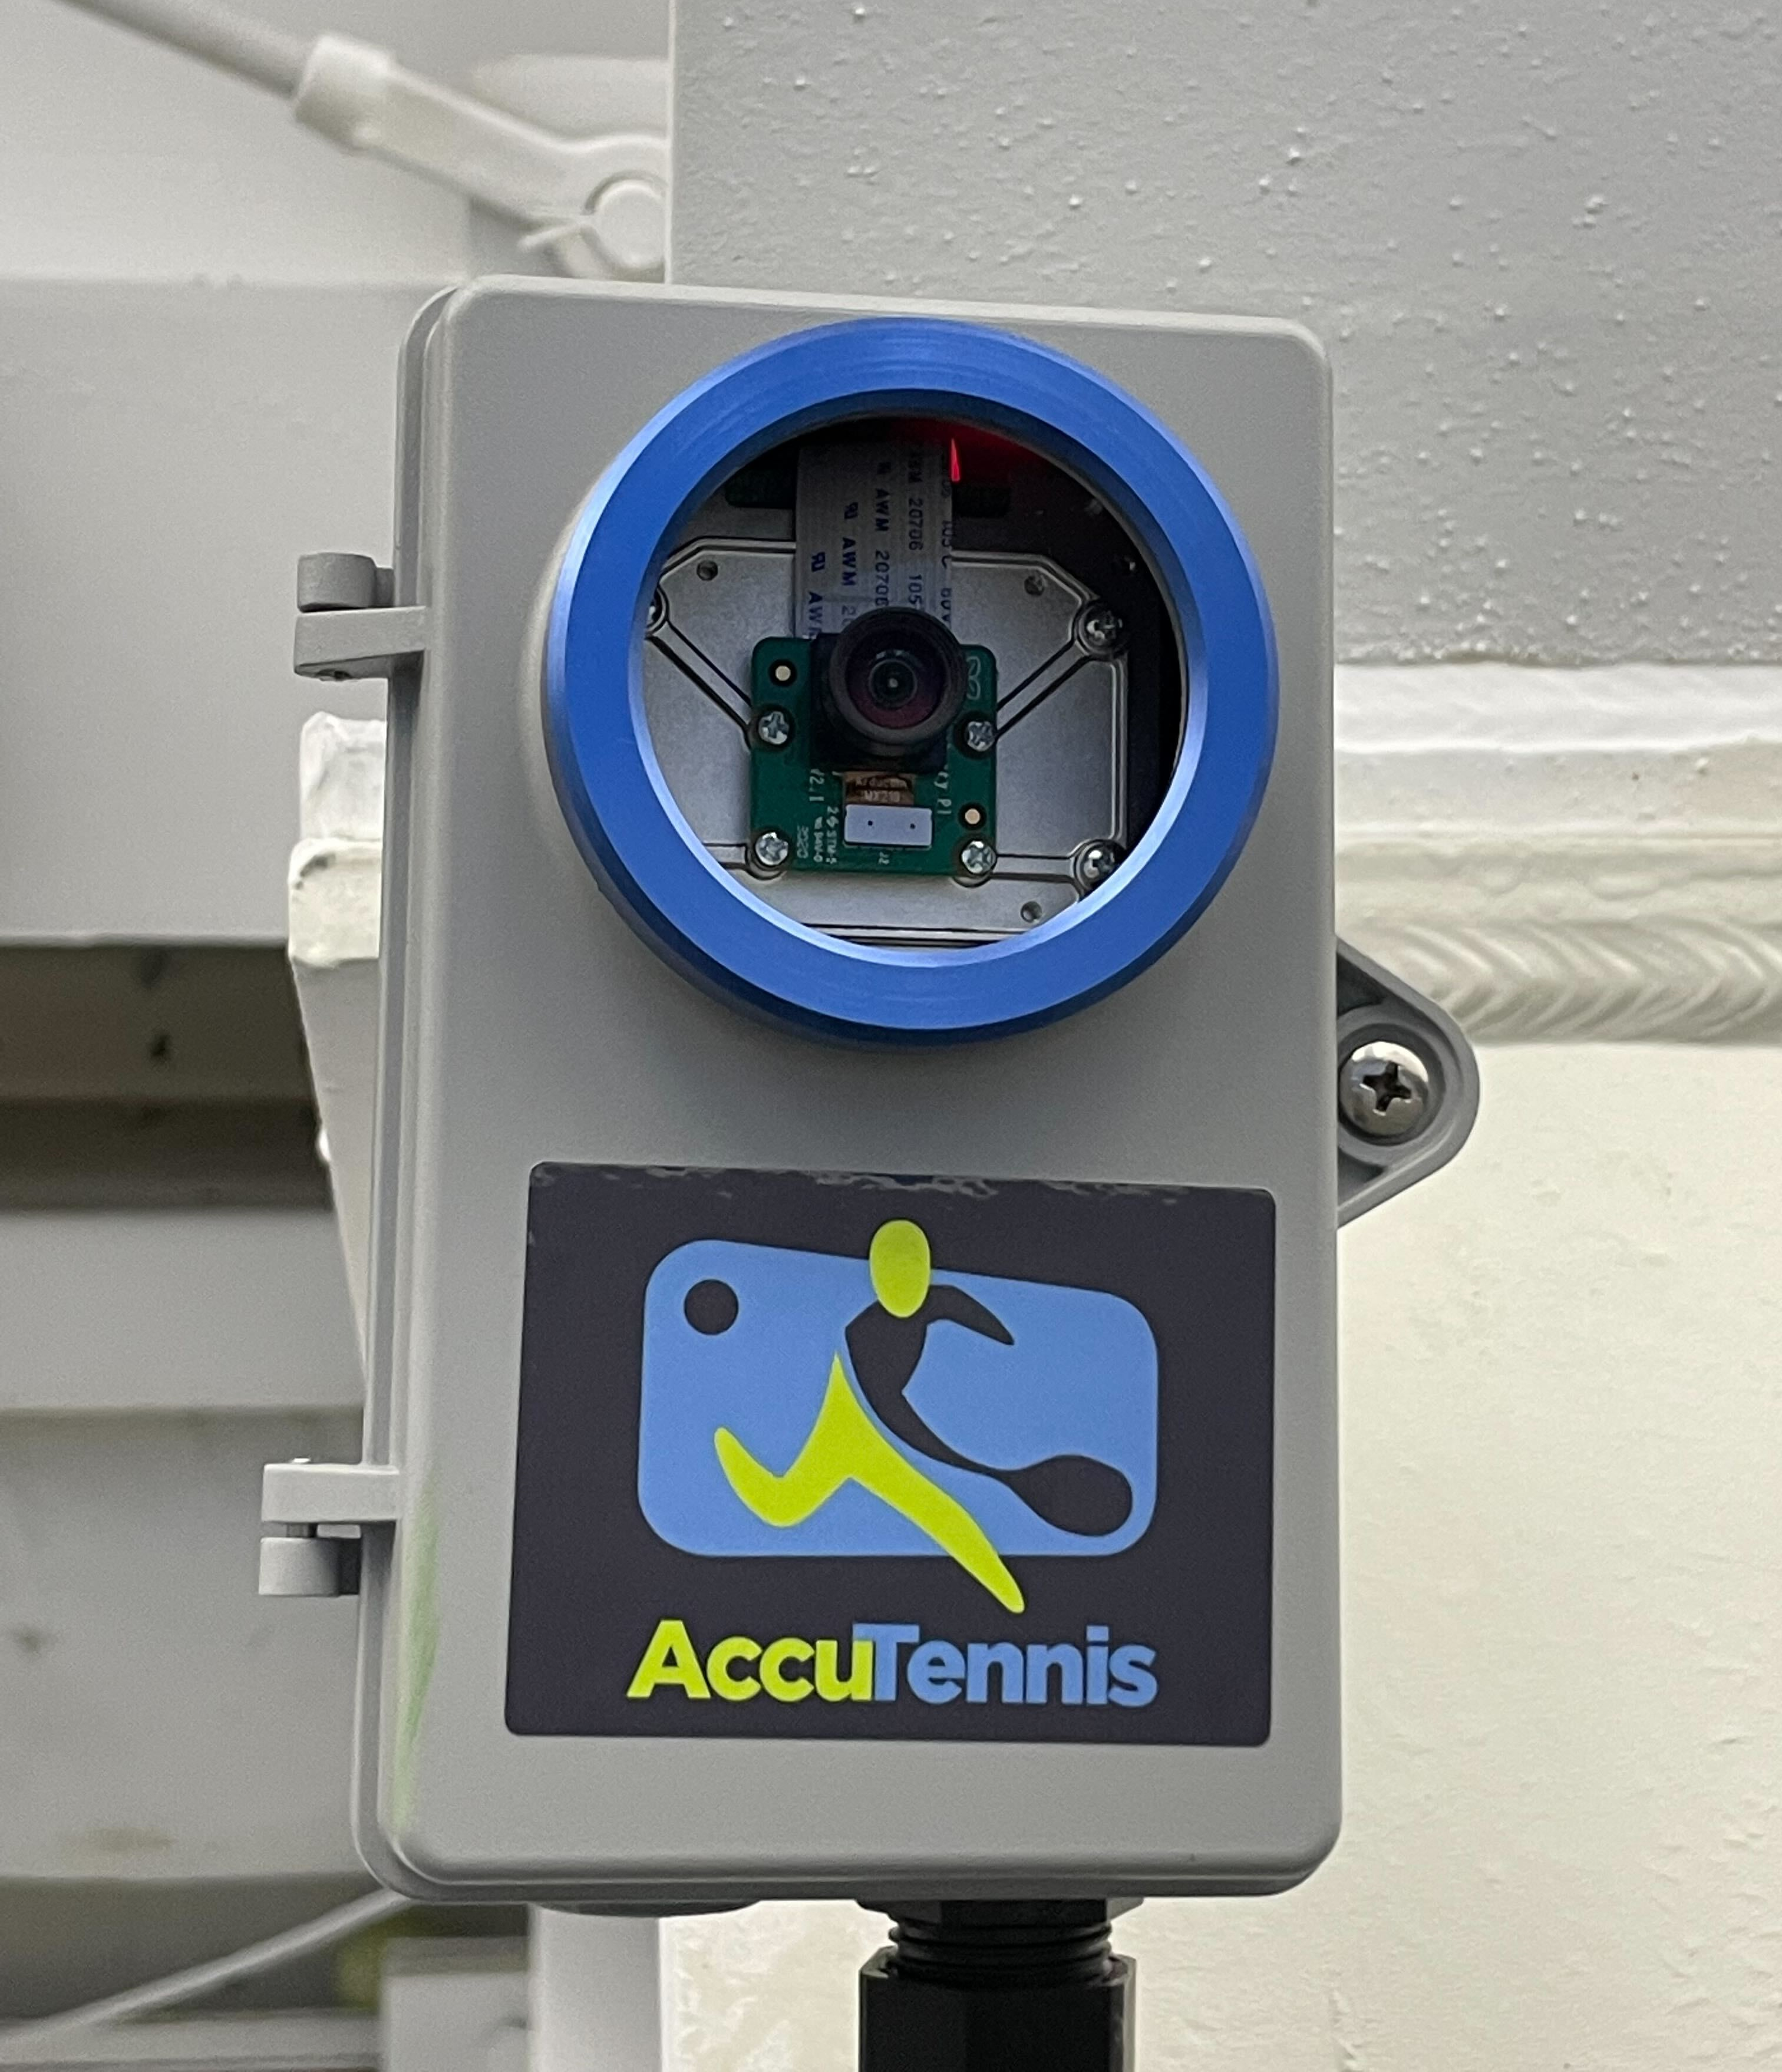 Wall camera used for tennis court line calling and player tracking